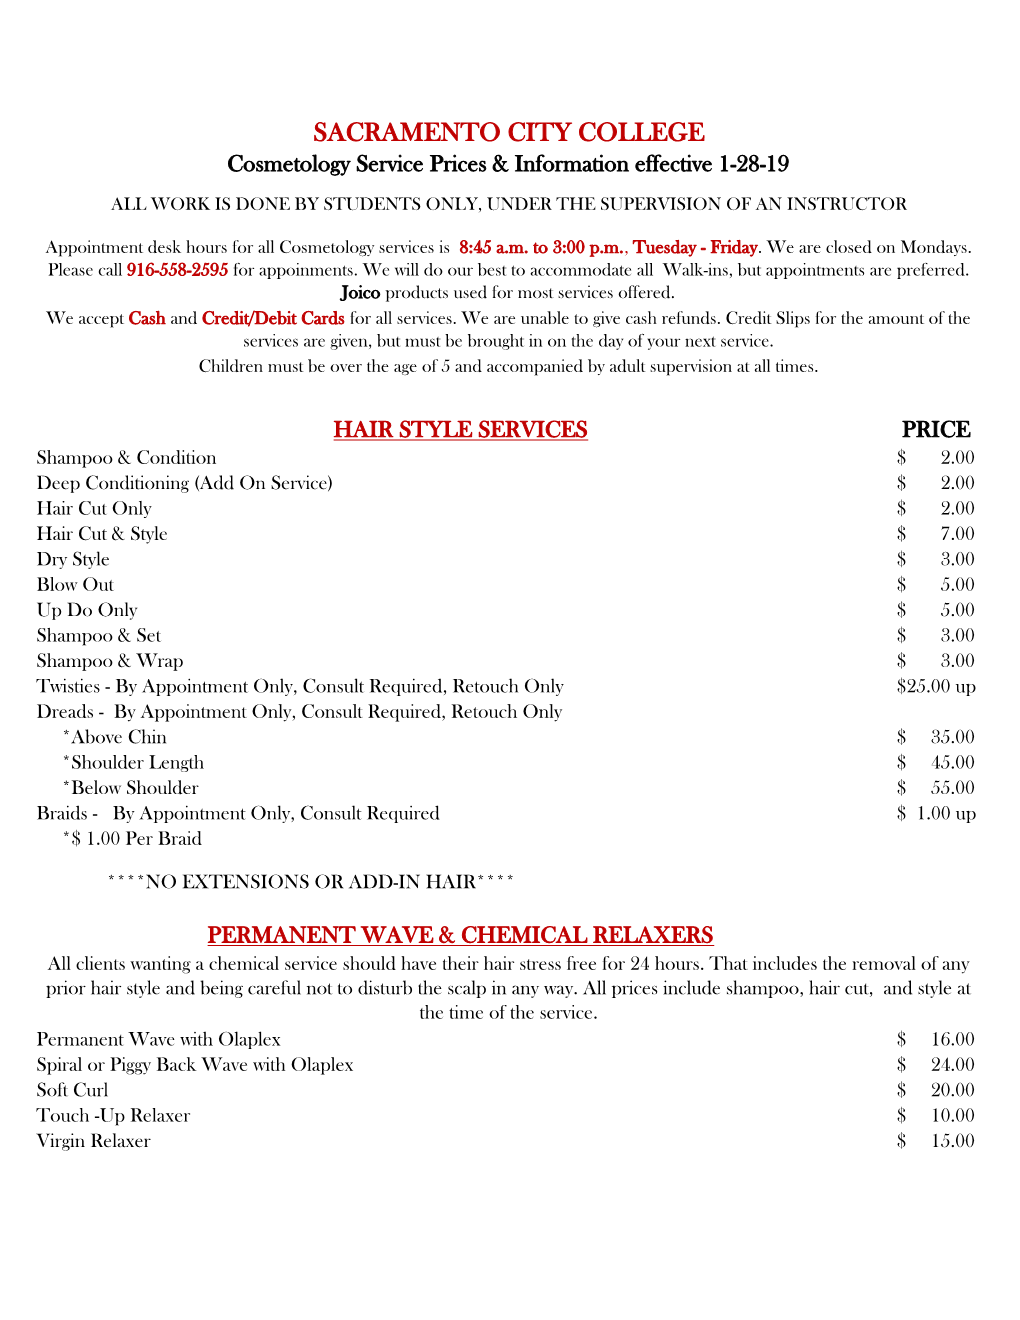 Price List for Cosmetology Services (PDF)